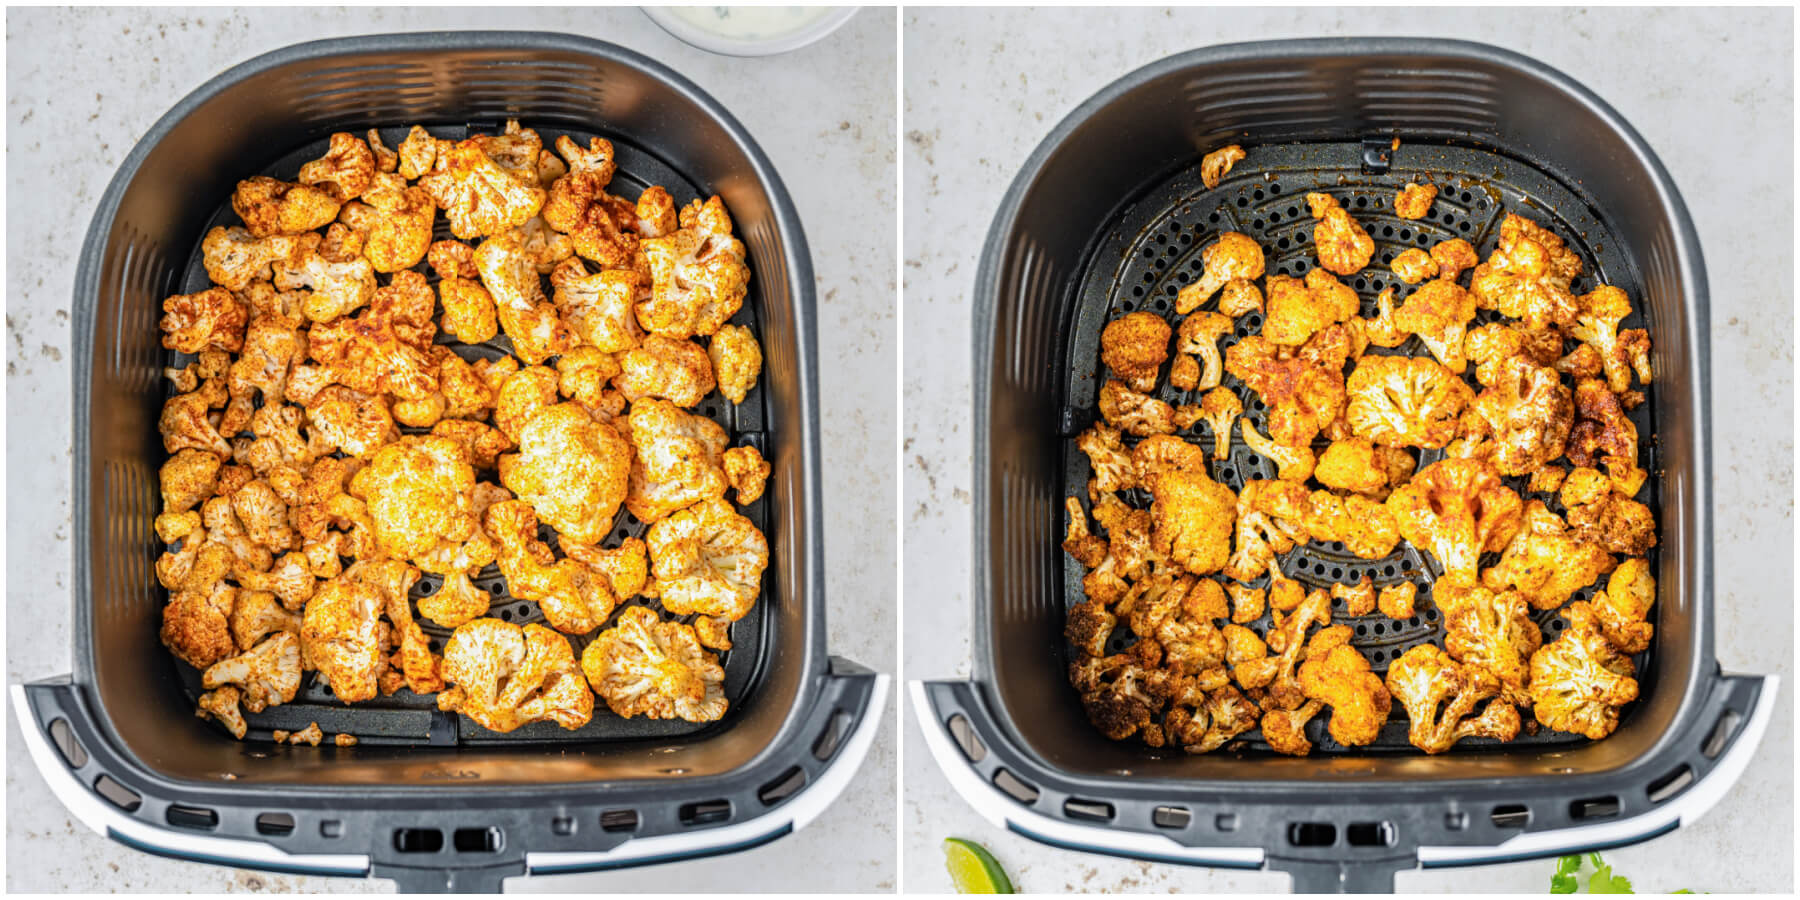 A series of two process images showing spiced raw cauliflower and cooked cauliflower in an air fryer basket.